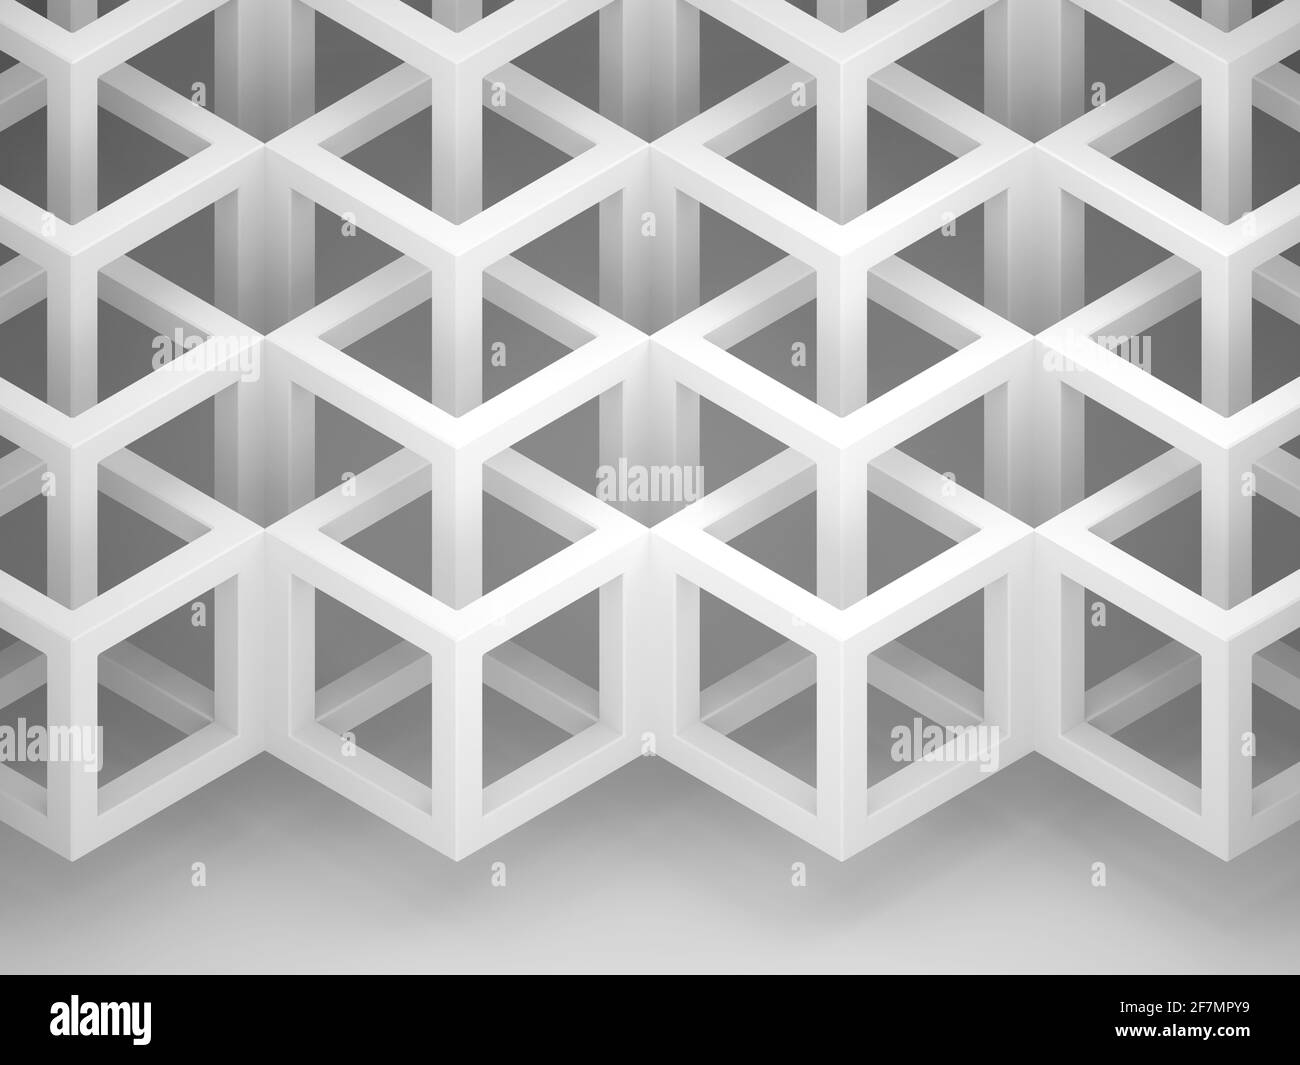 Three dimensional cubical structure, geometric pattern over light gray background with soft shadow, isometric view, 3d rendering illustation Stock Photo